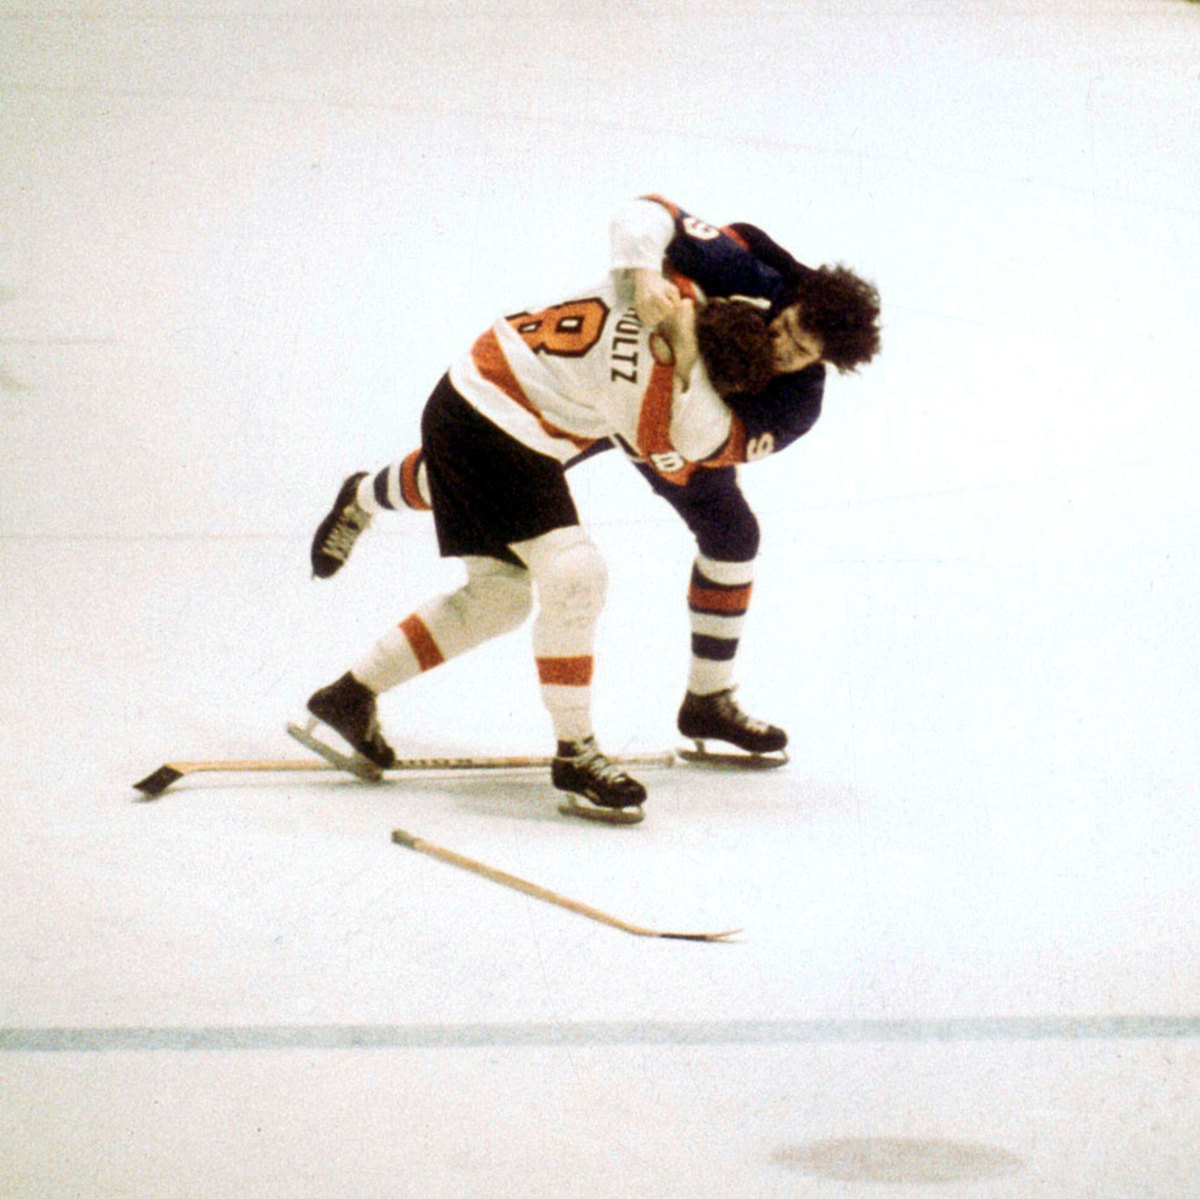 When Clark Gillies pummeled Dave Schultz, he lifted Islanders' championship  hopes - Newsday